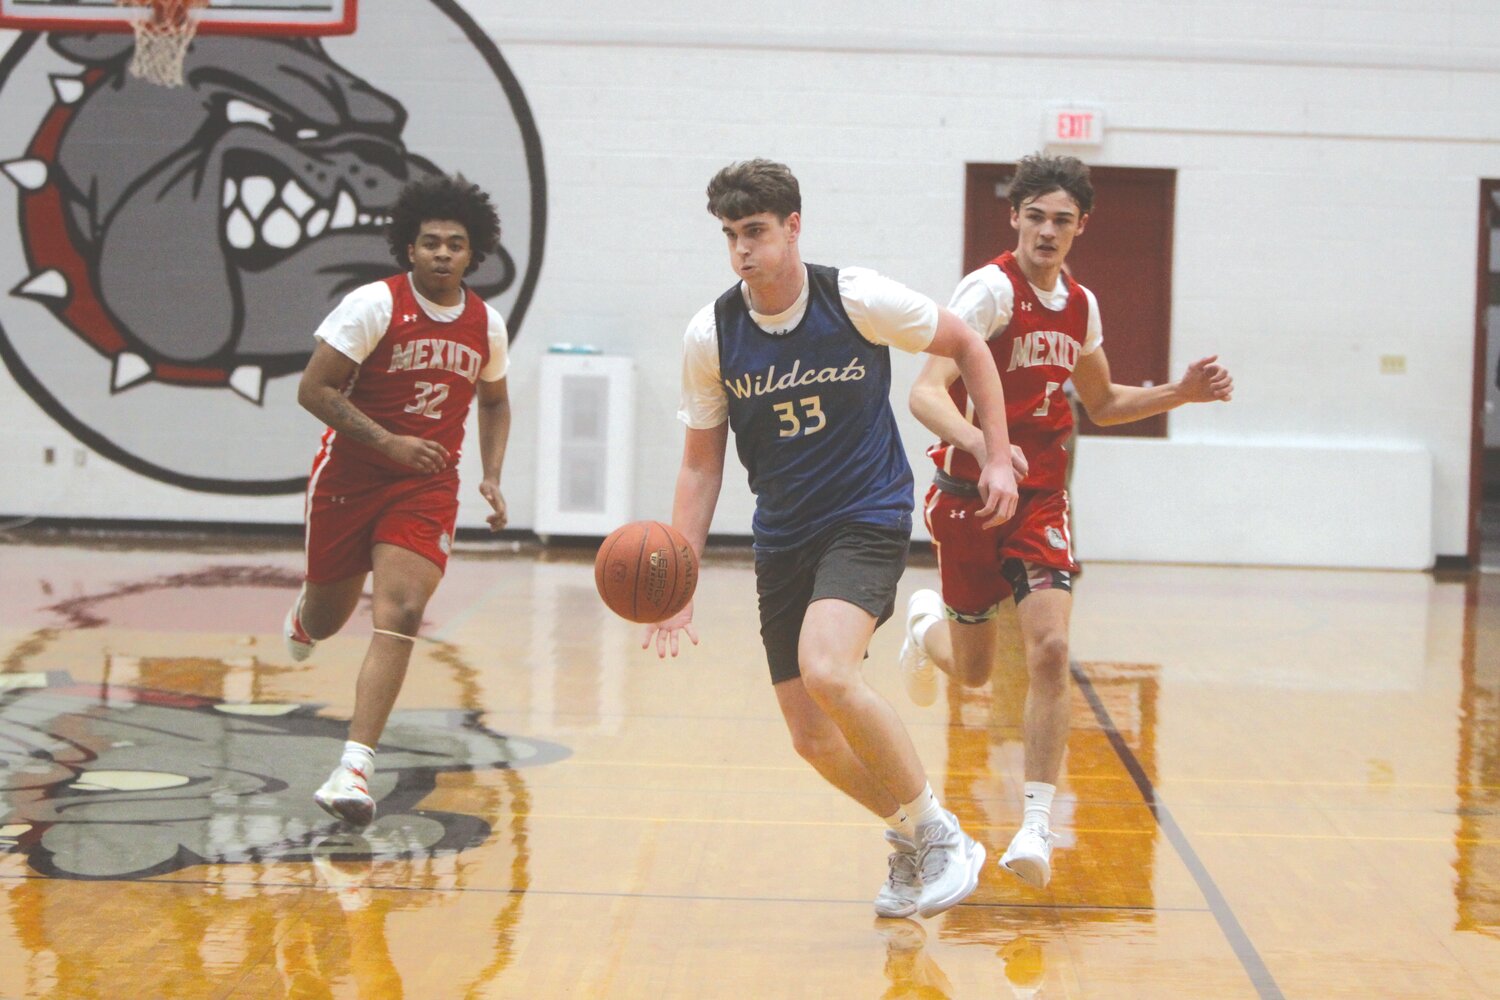 Montgomery County junior Clayton Parker dribbles at midcourt during a jamboree at Mexico High School on Nov. 13. Parker and the Wildcats are looking to finish with their fifth consecutive winning season this winter.